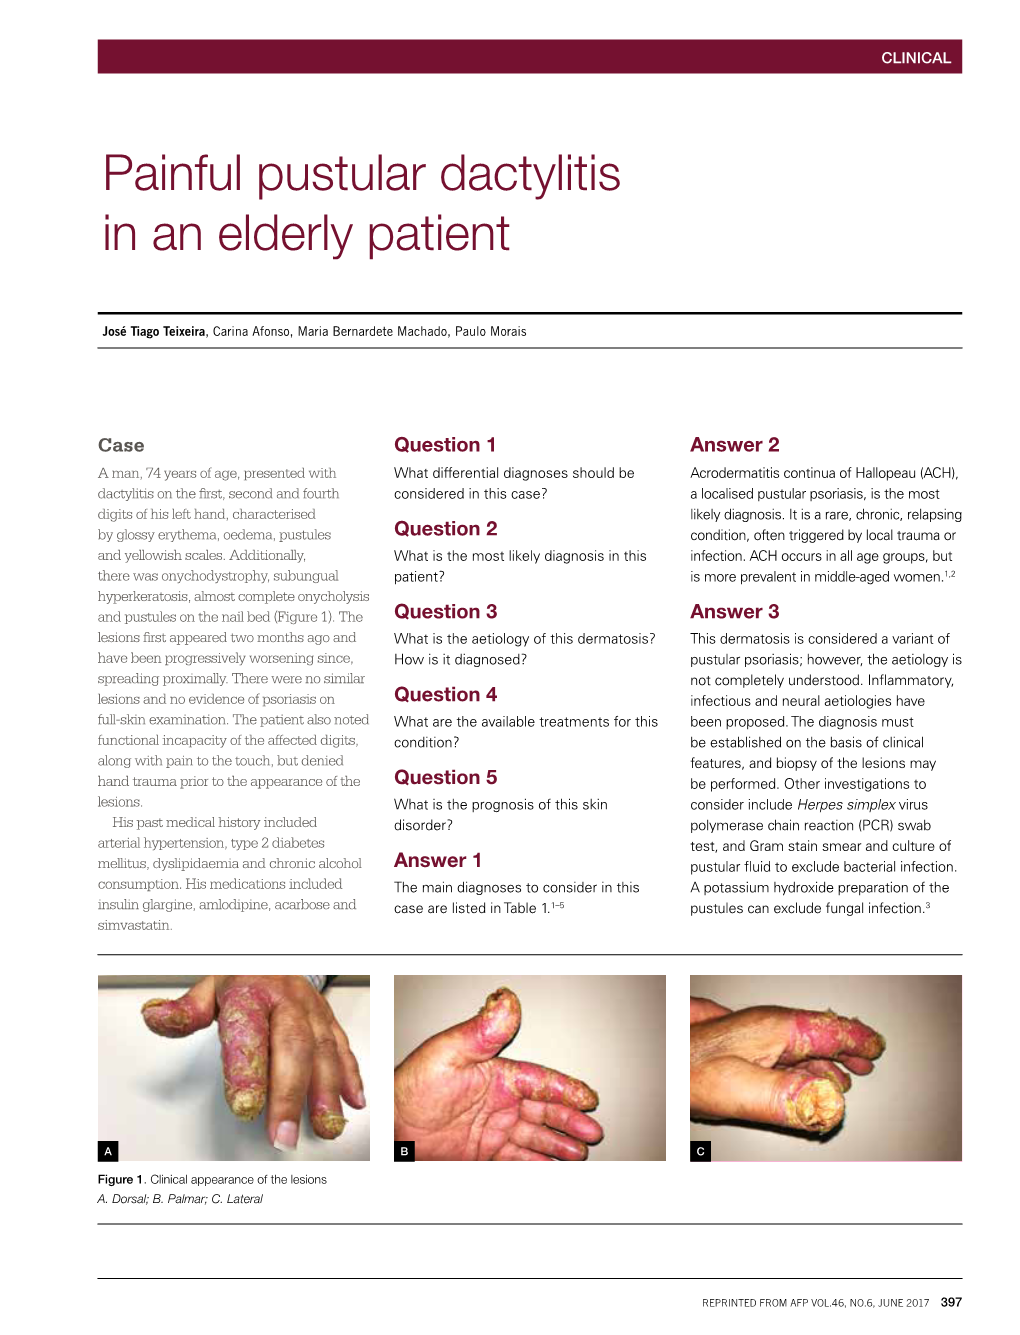 Painful Pustular Dactylitis in an Elderly Patient